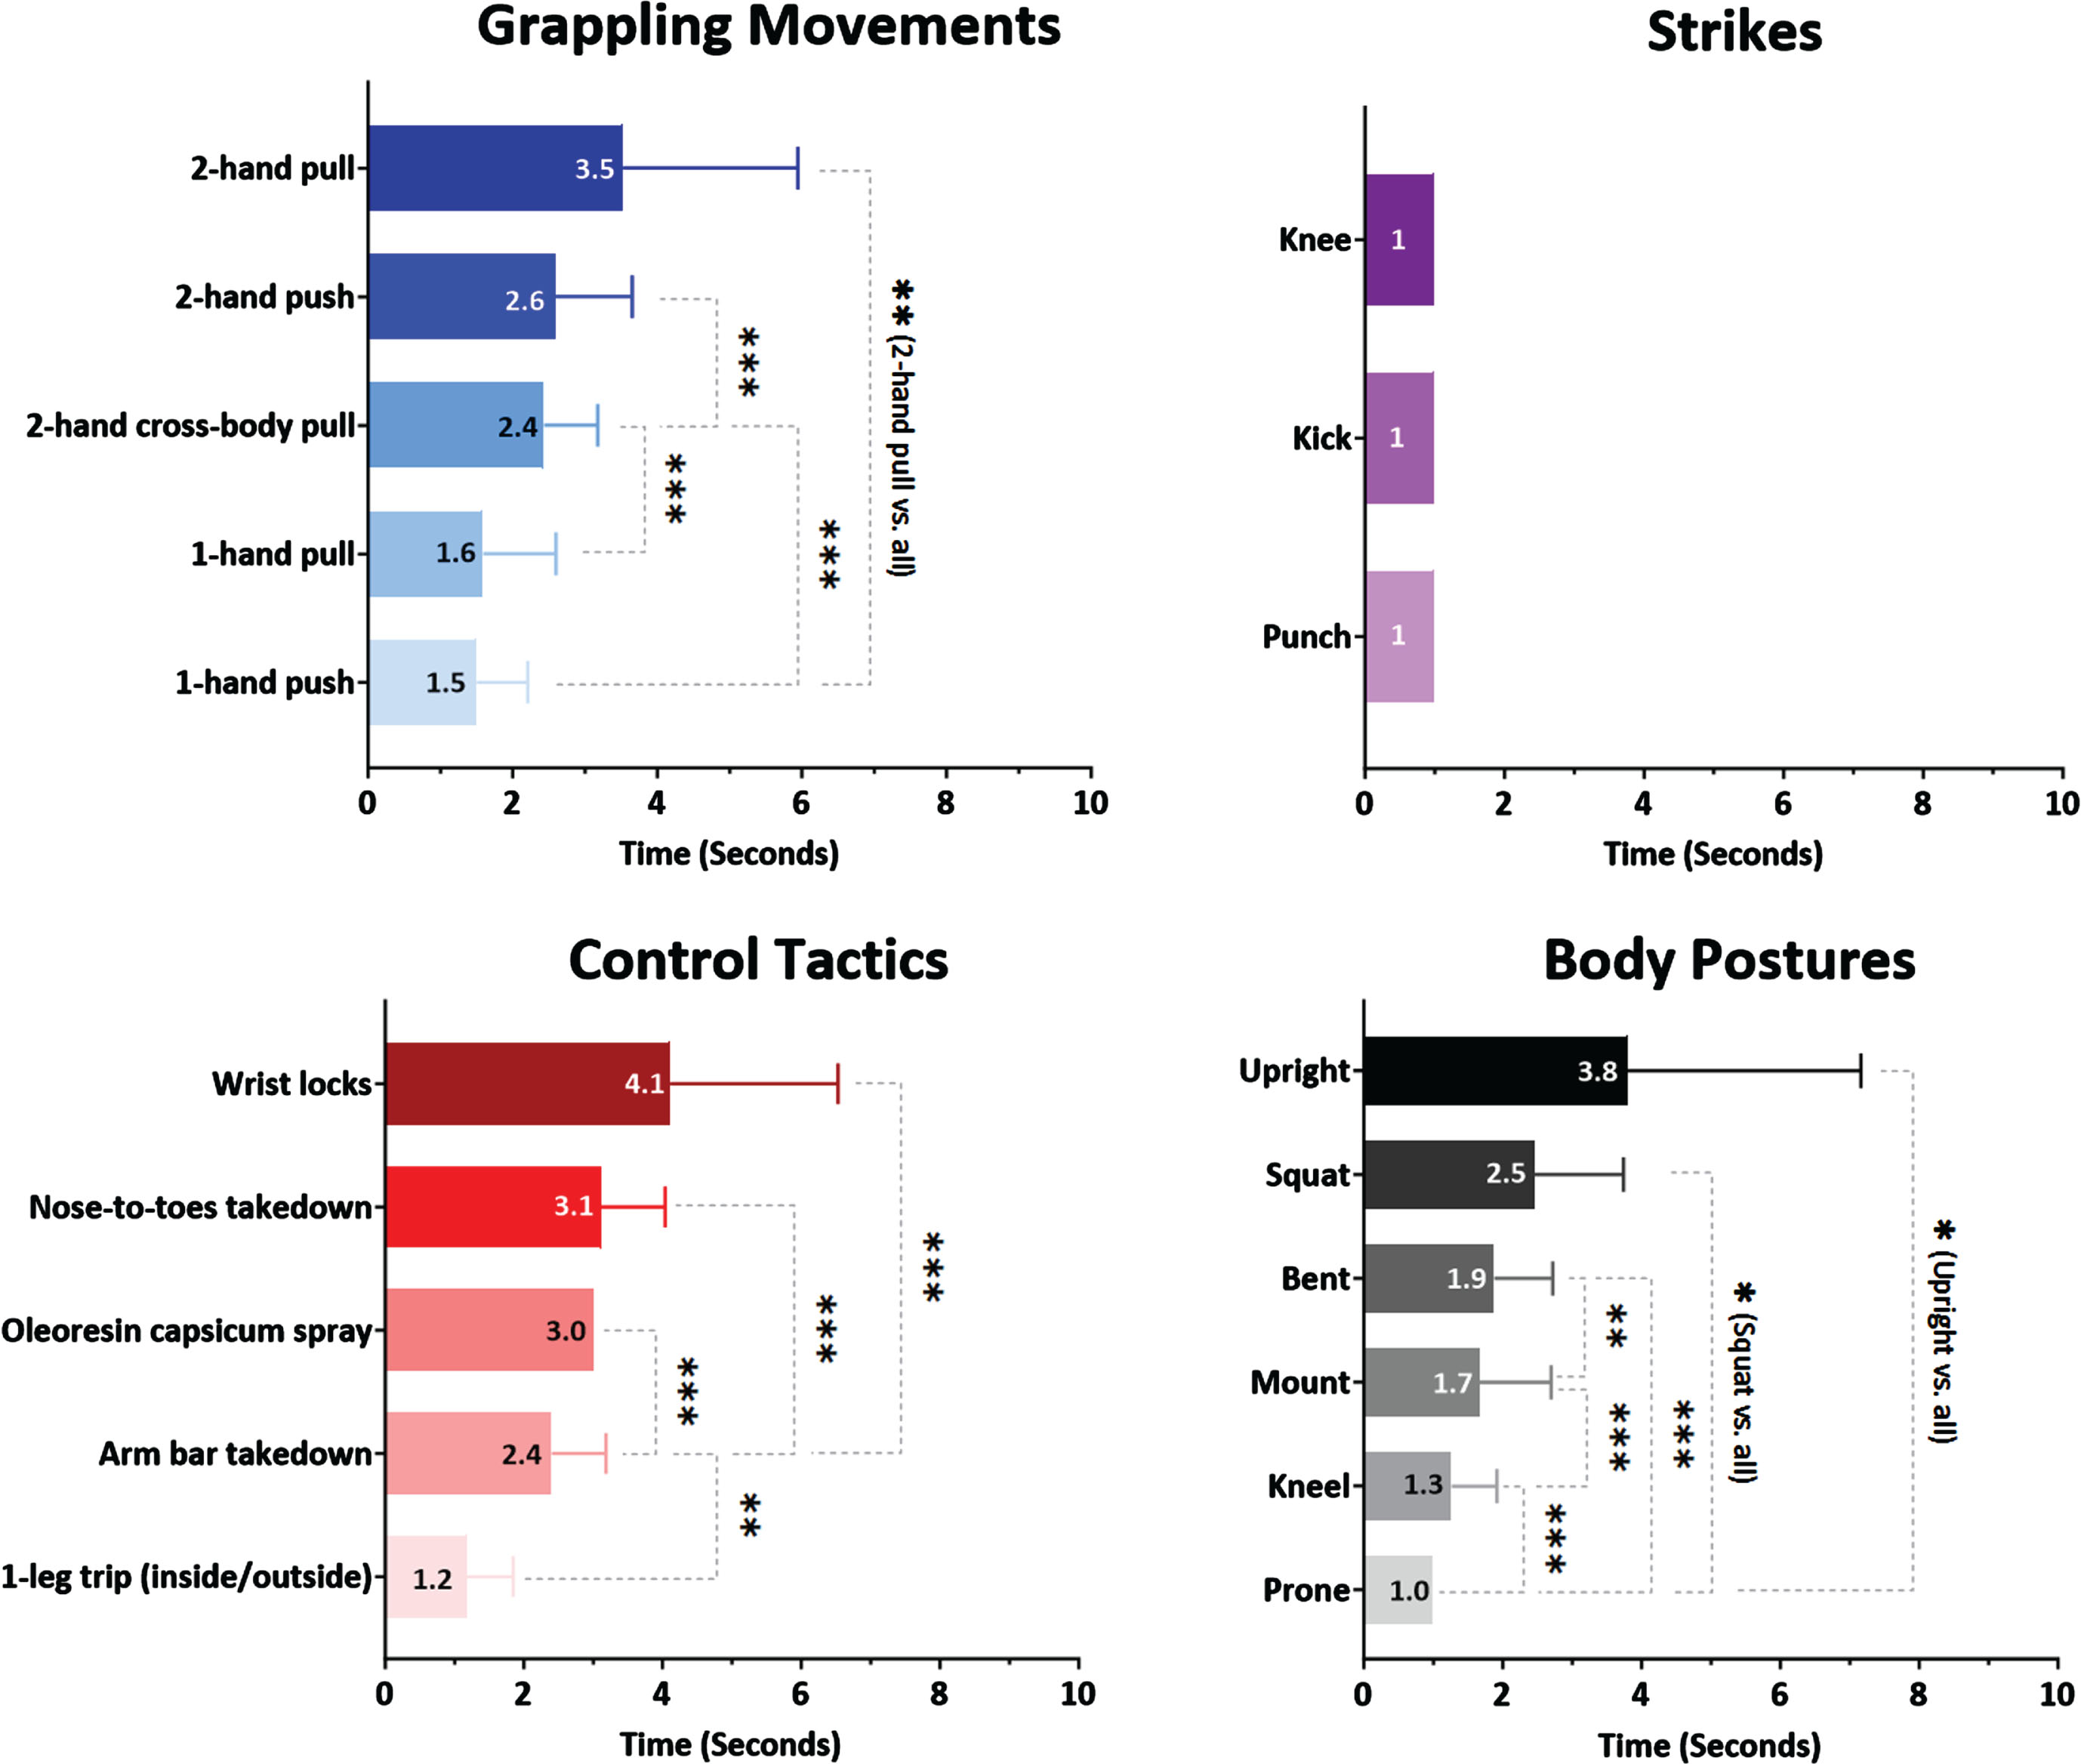 Mean duration of technical-tactical behaviors during task simulations. This figure displays the mean duration and standard deviation of various technical-tactical behaviors performed by officers, categorized into grappling movements (blue), control tactics (red), strikes (purple), and body postures (black/gray). Each bar illustrates the mean duration of a specific behavior within its category, with darker to lighter shades within each category representing longer to shorter durations, respectively. The significance of differences in mean durations between behaviors is indicated by asterisks adjacent to the bars, with *P < 0.05, **P < 0.01, and ***P < 0.001.